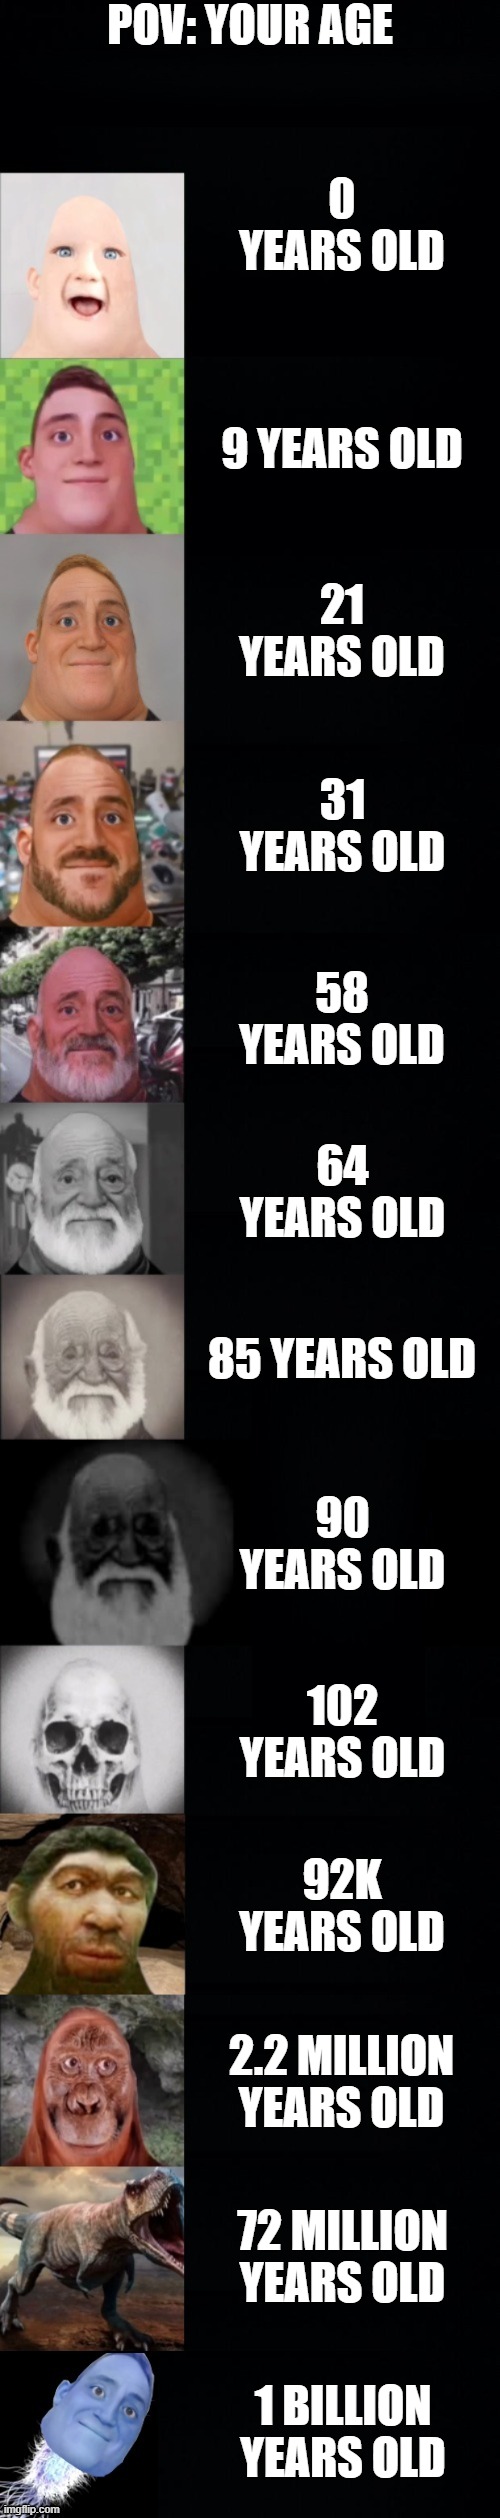 POV: Your age is | POV: YOUR AGE; 0 YEARS OLD; 9 YEARS OLD; 21 YEARS OLD; 31 YEARS OLD; 58 YEARS OLD; 64 YEARS OLD; 85 YEARS OLD; 90 YEARS OLD; 102 YEARS OLD; 92K YEARS OLD; 2.2 MILLION YEARS OLD; 72 MILLION YEARS OLD; 1 BILLION YEARS OLD | image tagged in mr incredible becoming older fixed | made w/ Imgflip meme maker